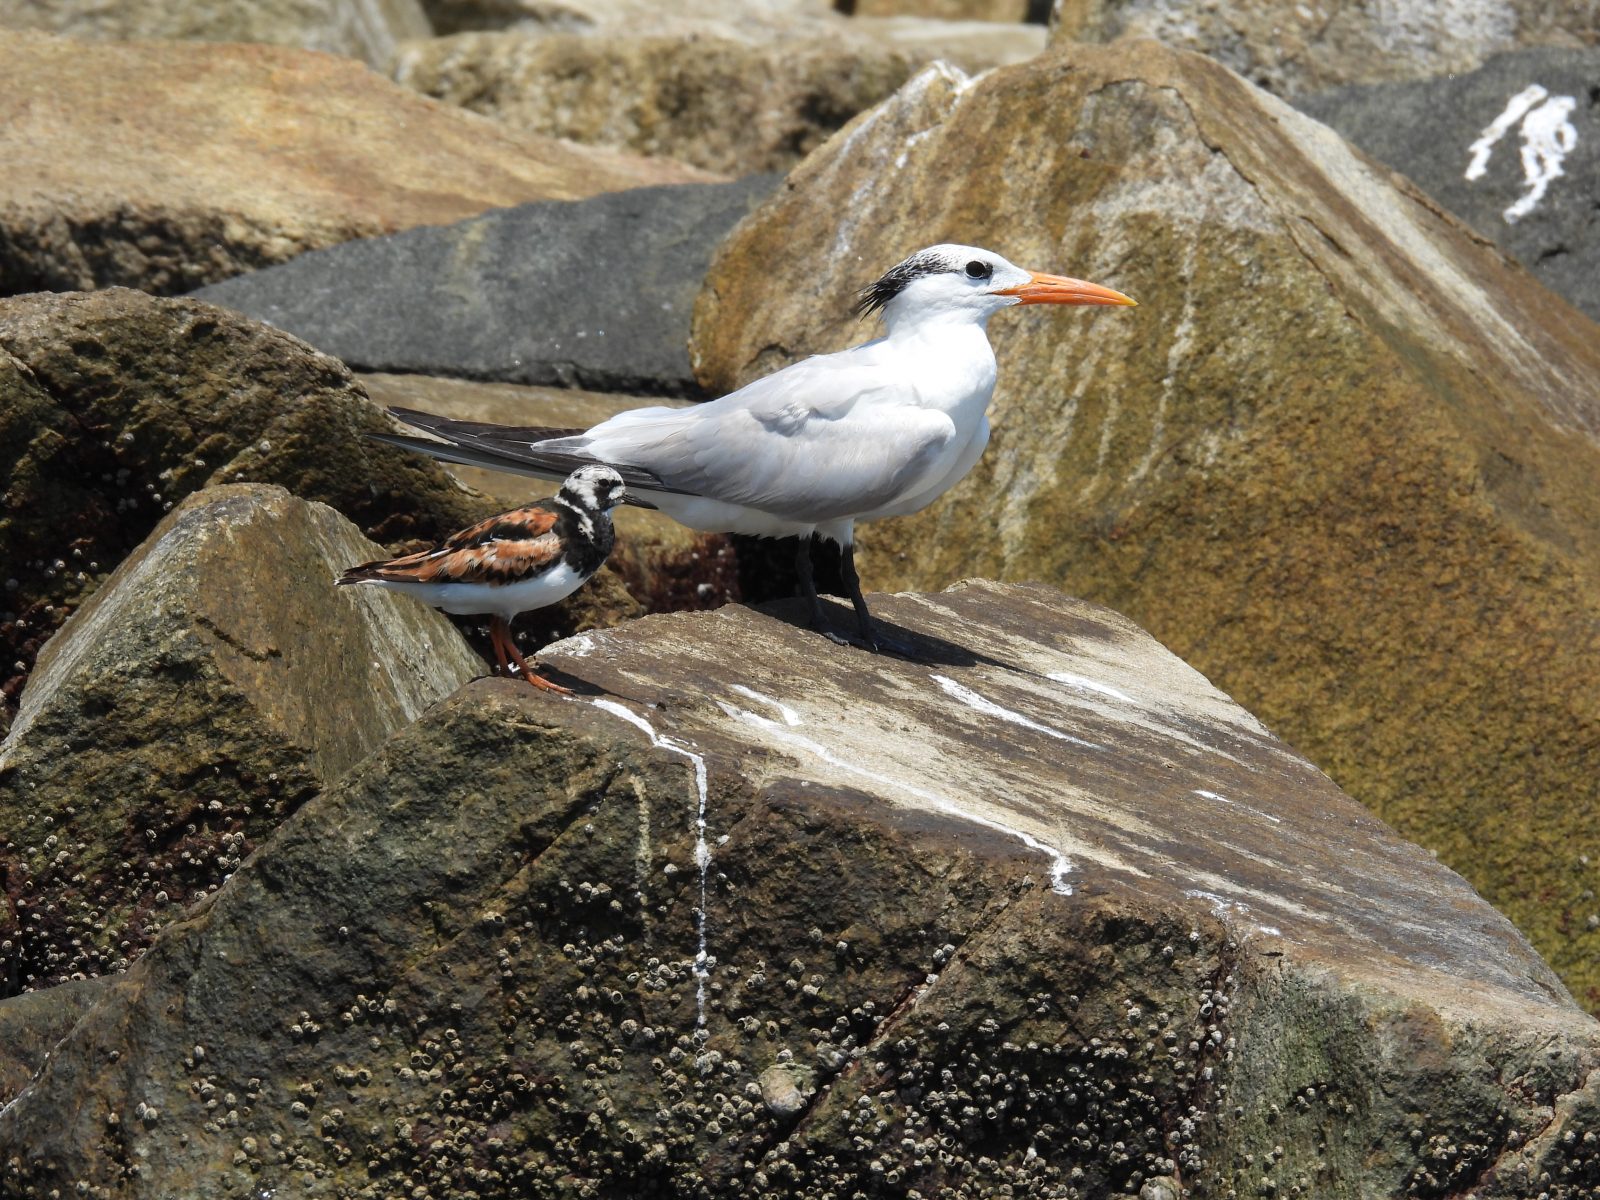 A royal tern and a ruddy turnstone share a perch amongst the Ft. Wool riprap.